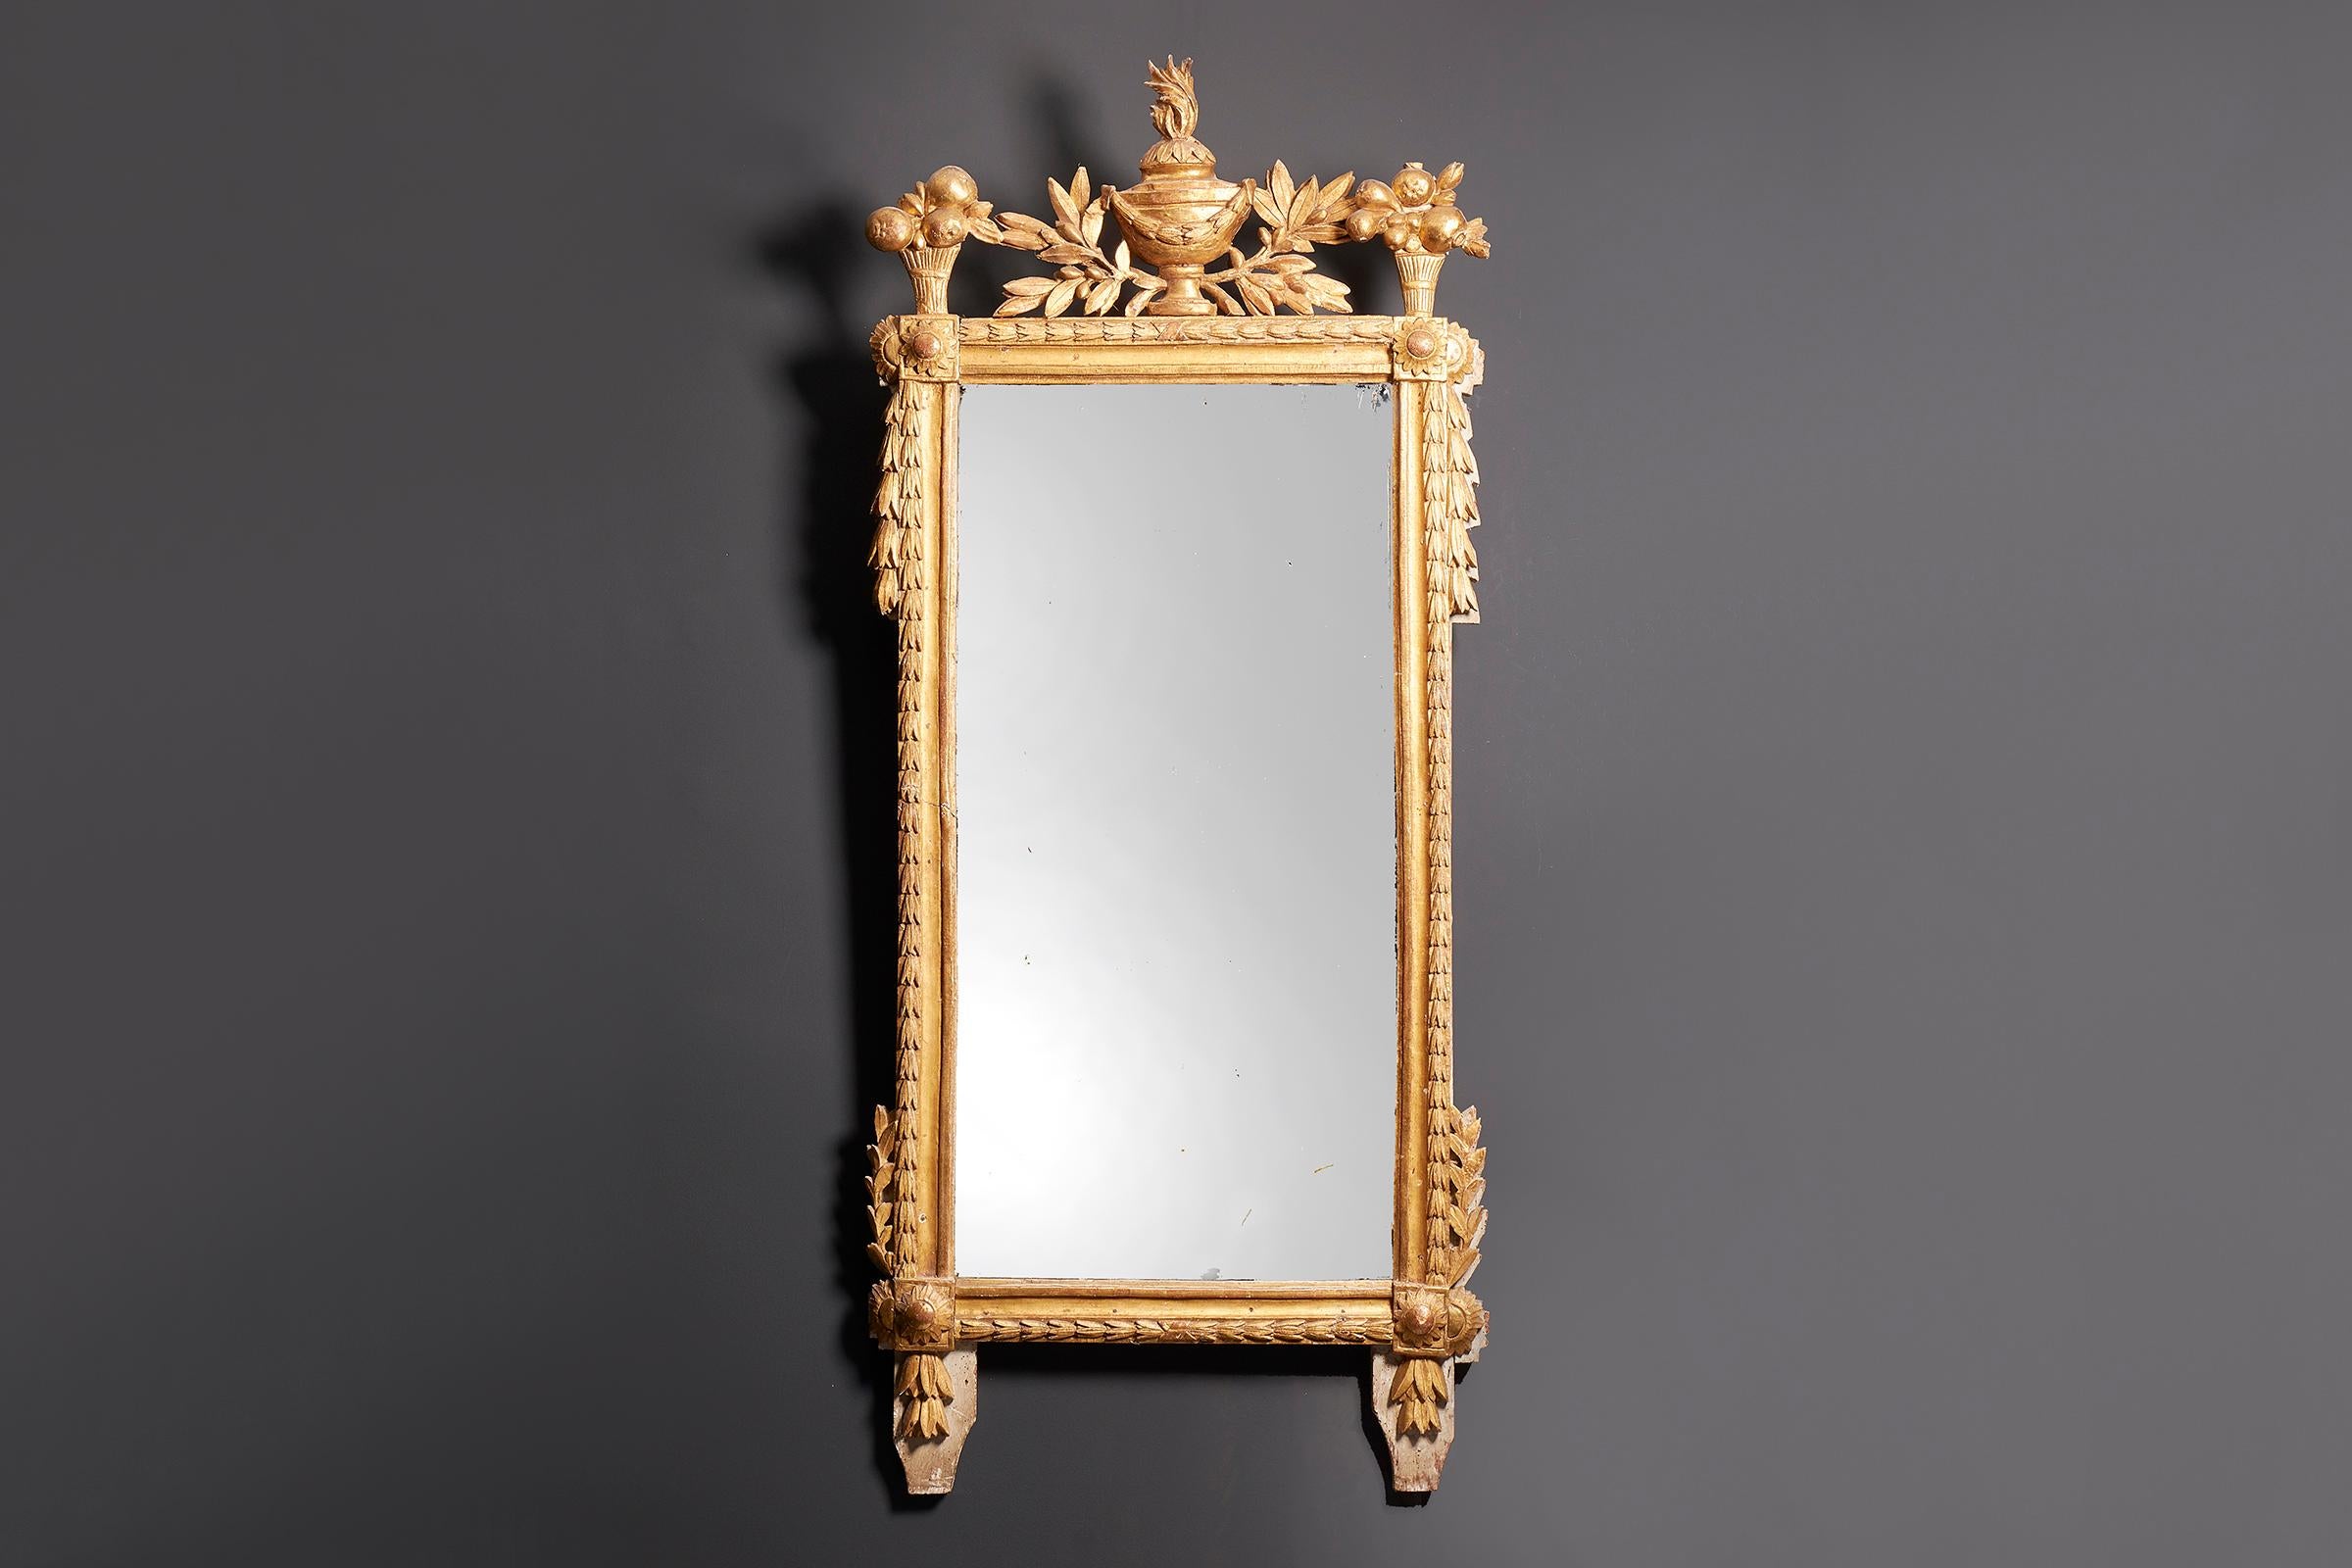 18th Century French Neoclassical Giltwood Mirror In Good Condition For Sale In Petworth, West Sussex